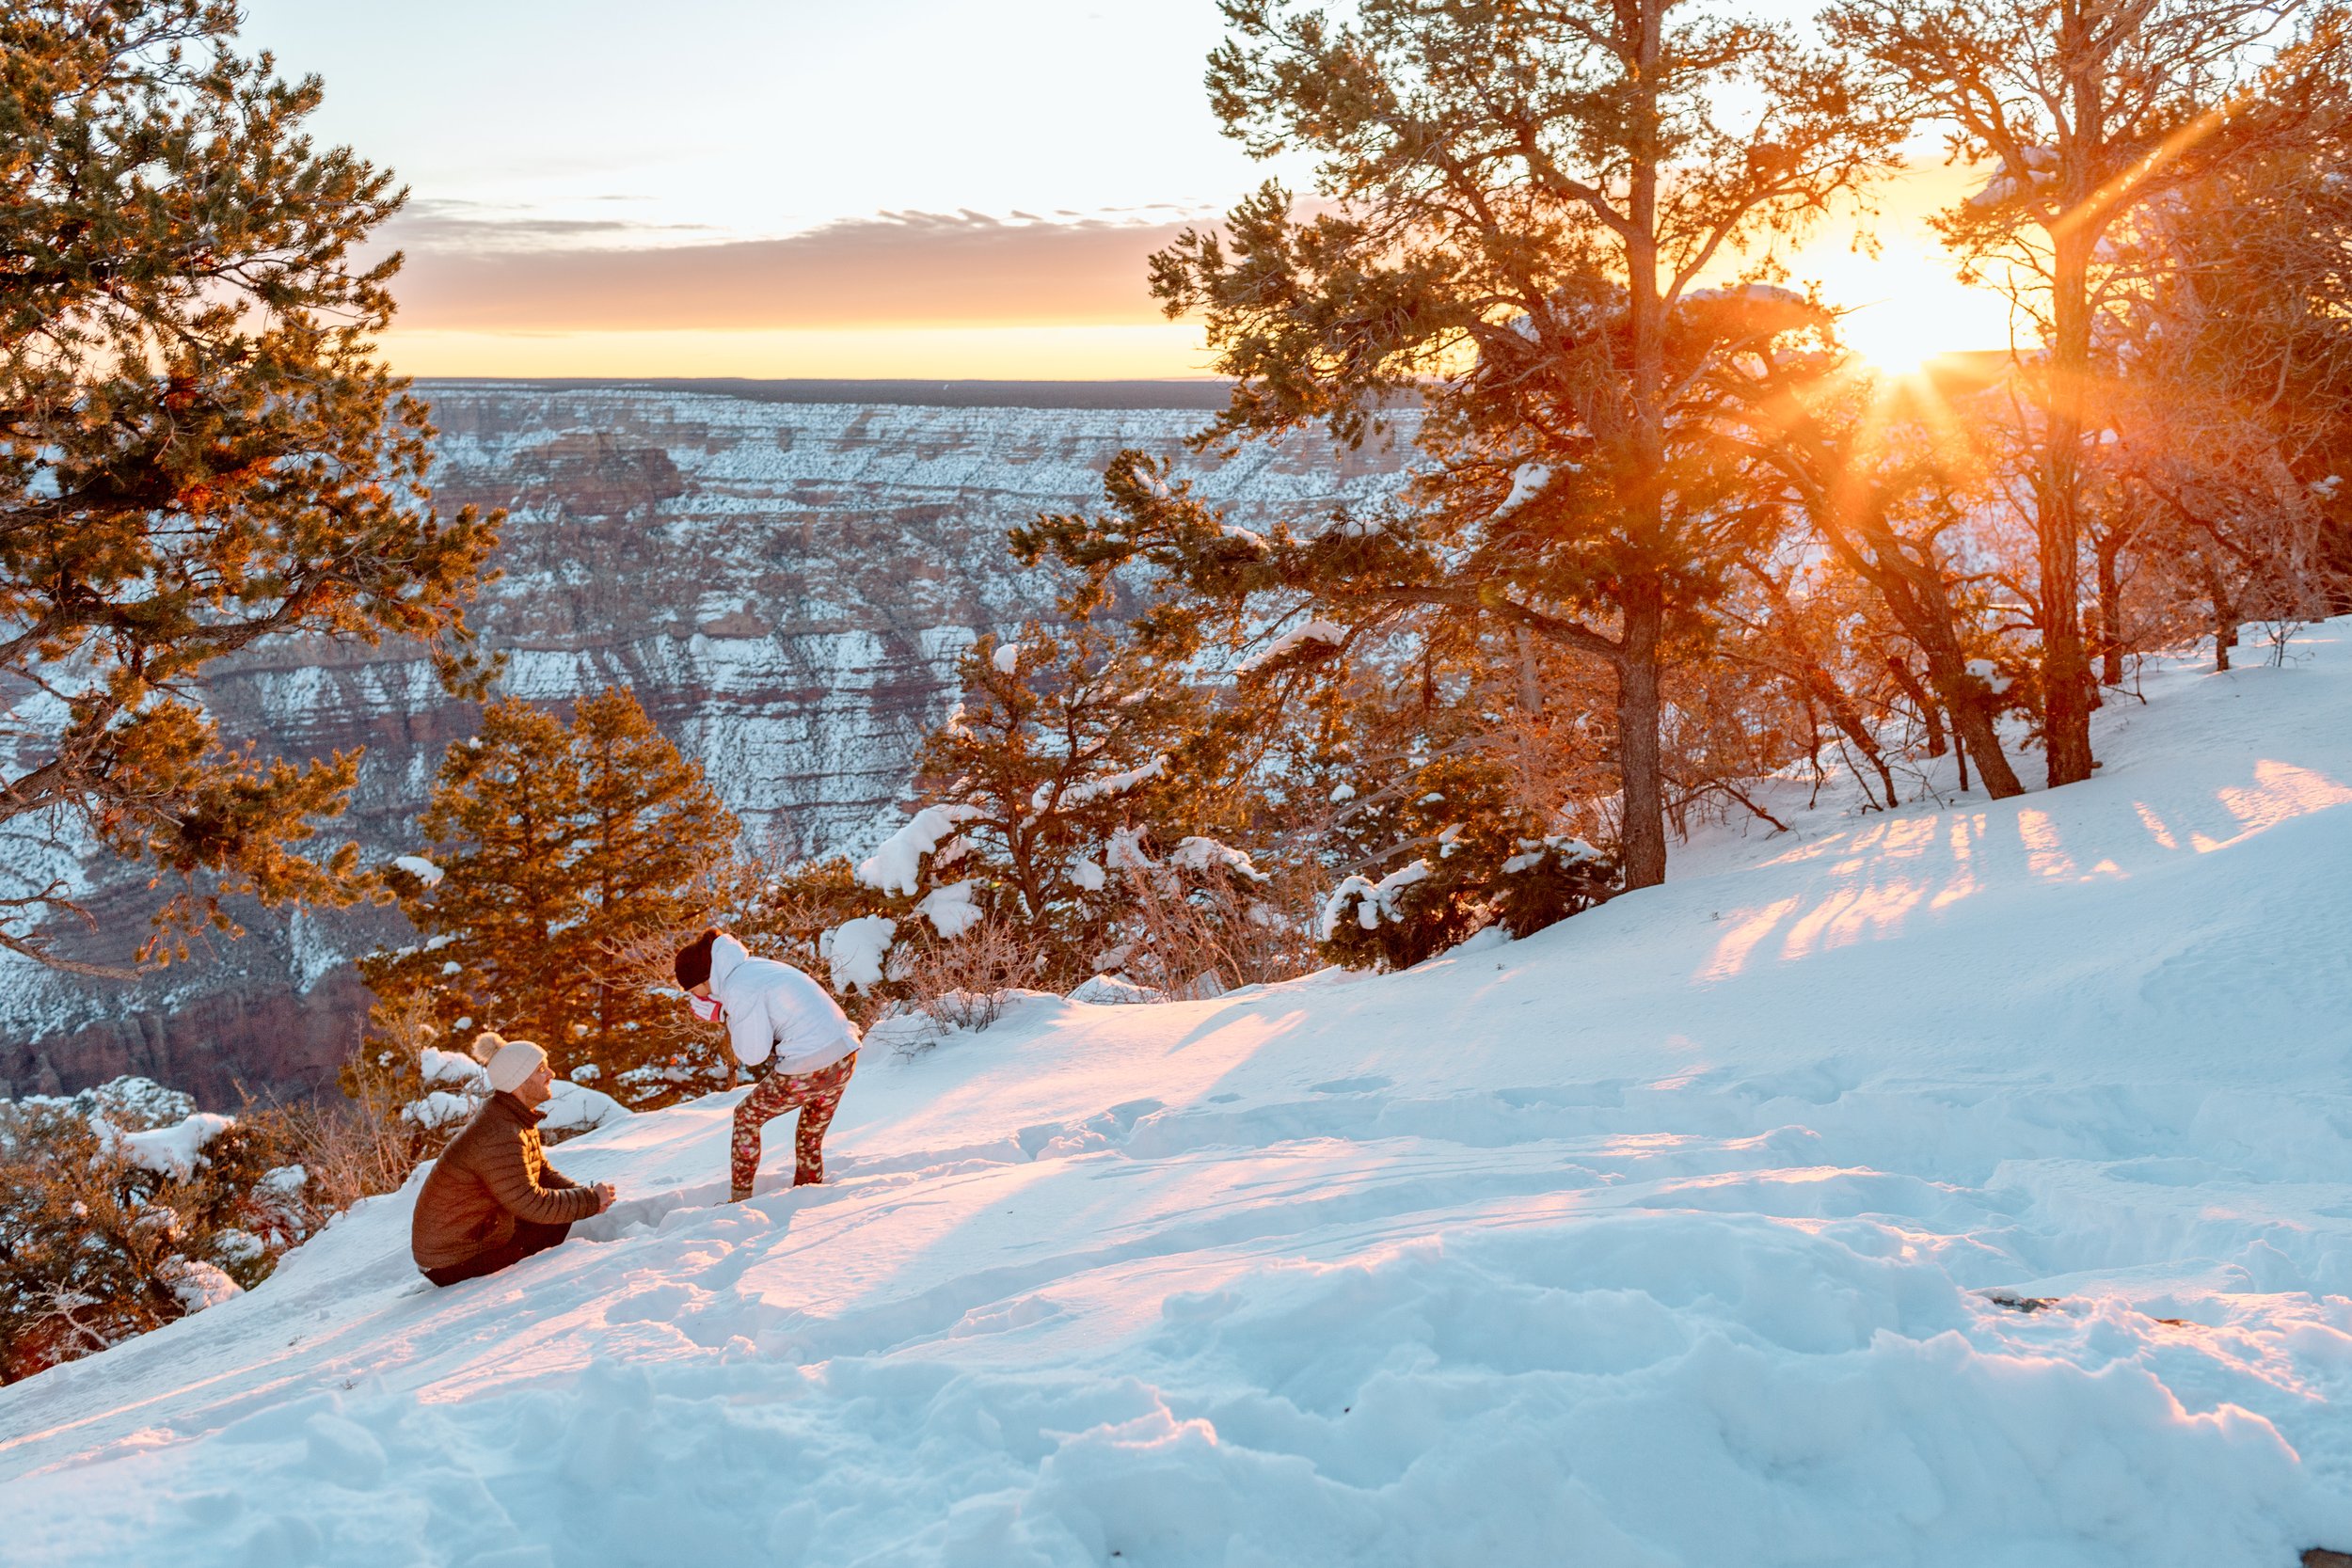  man proposes to girlfriend in deep snow at sunrise at the grand canyon 